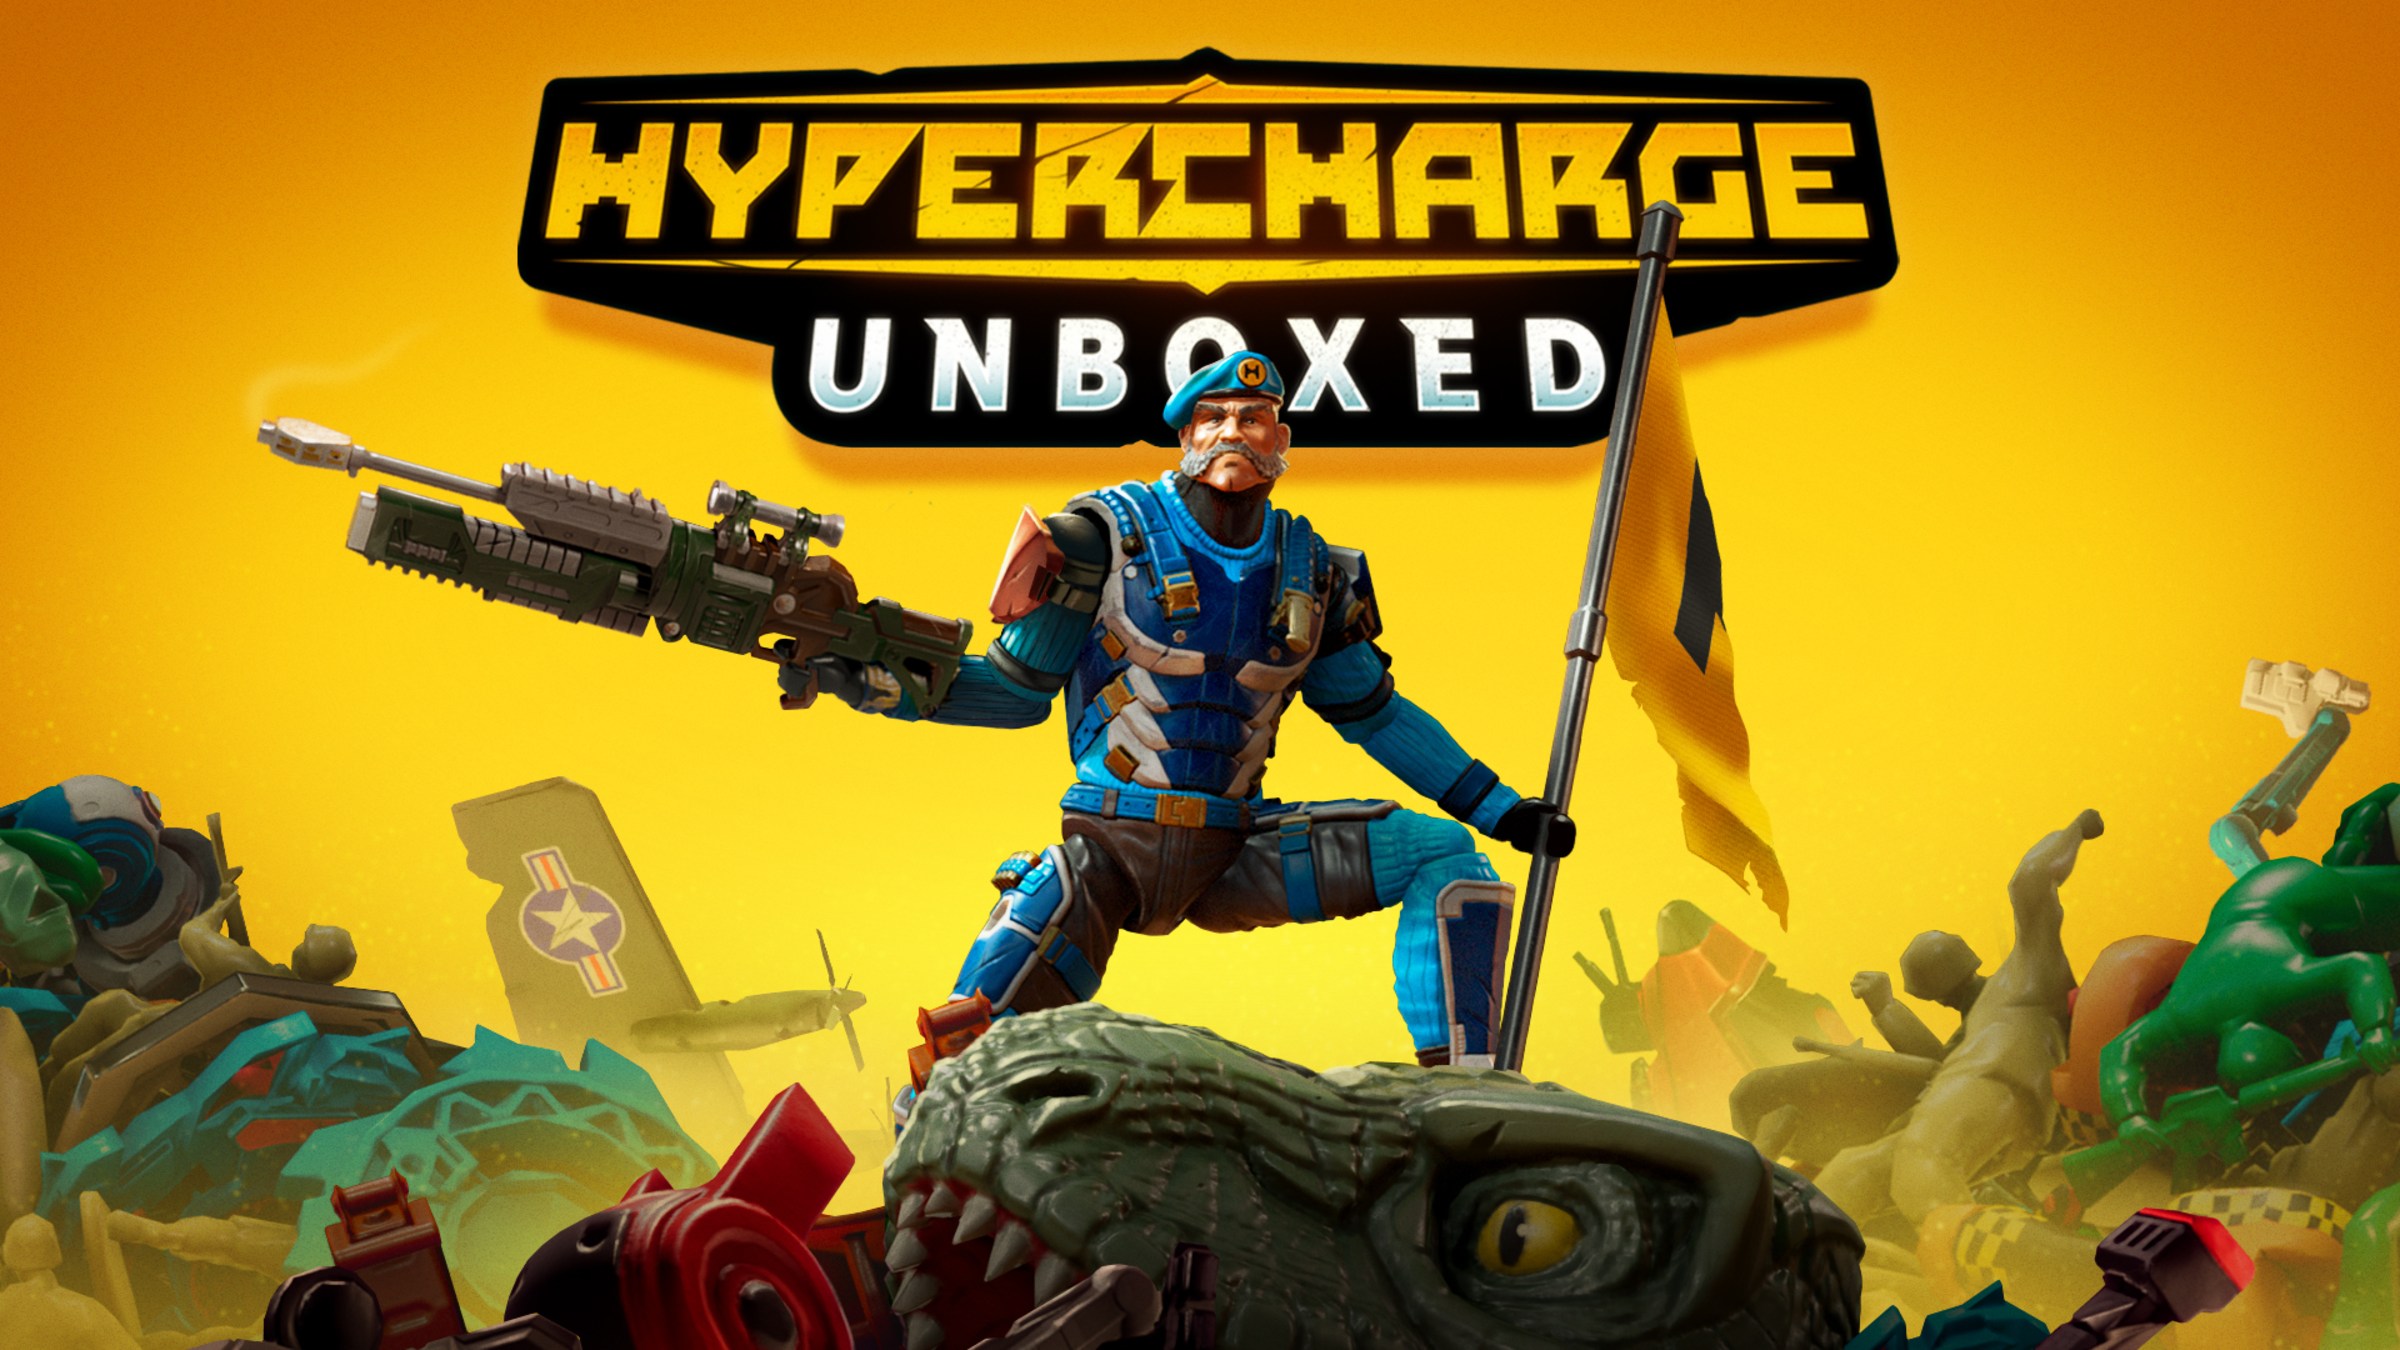 HYPERCHARGE Unboxed for Nintendo Switch